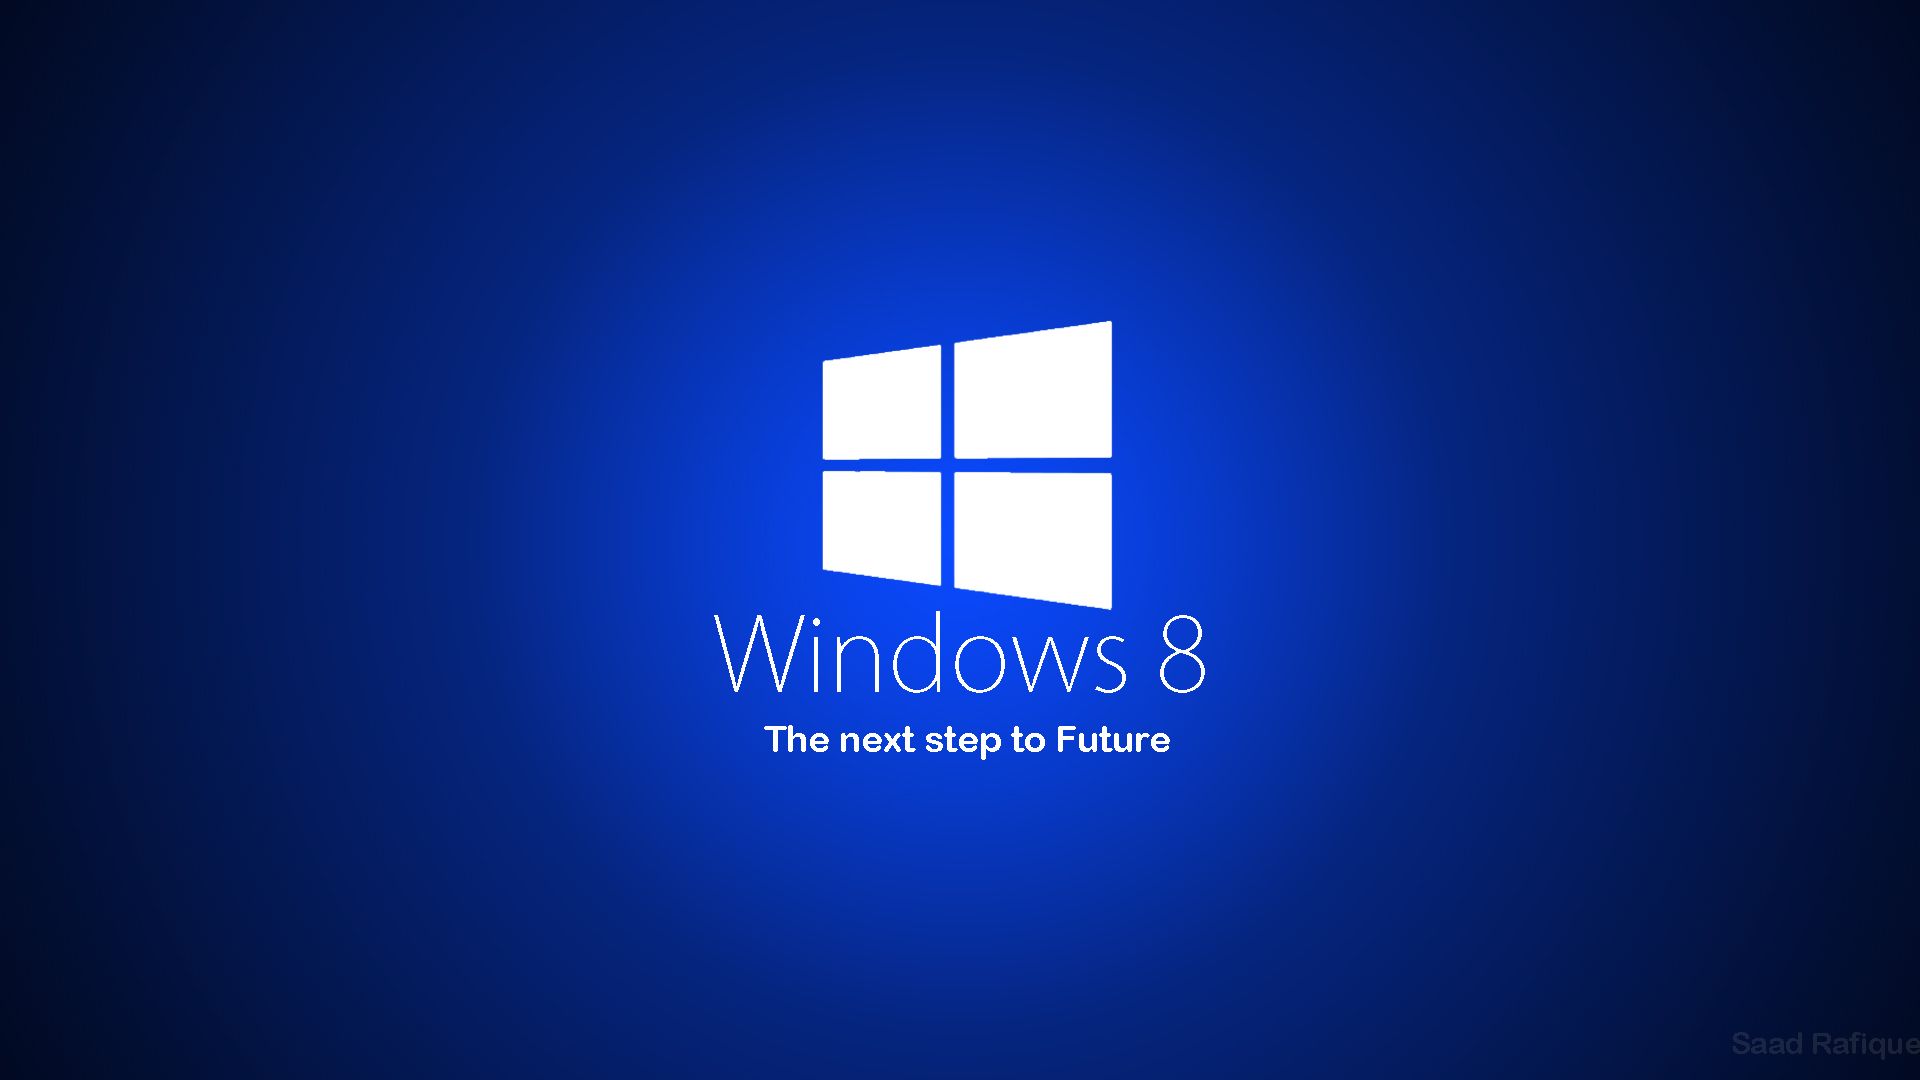 Windows 8 Themes Wallpapers | nicepcwallpapers